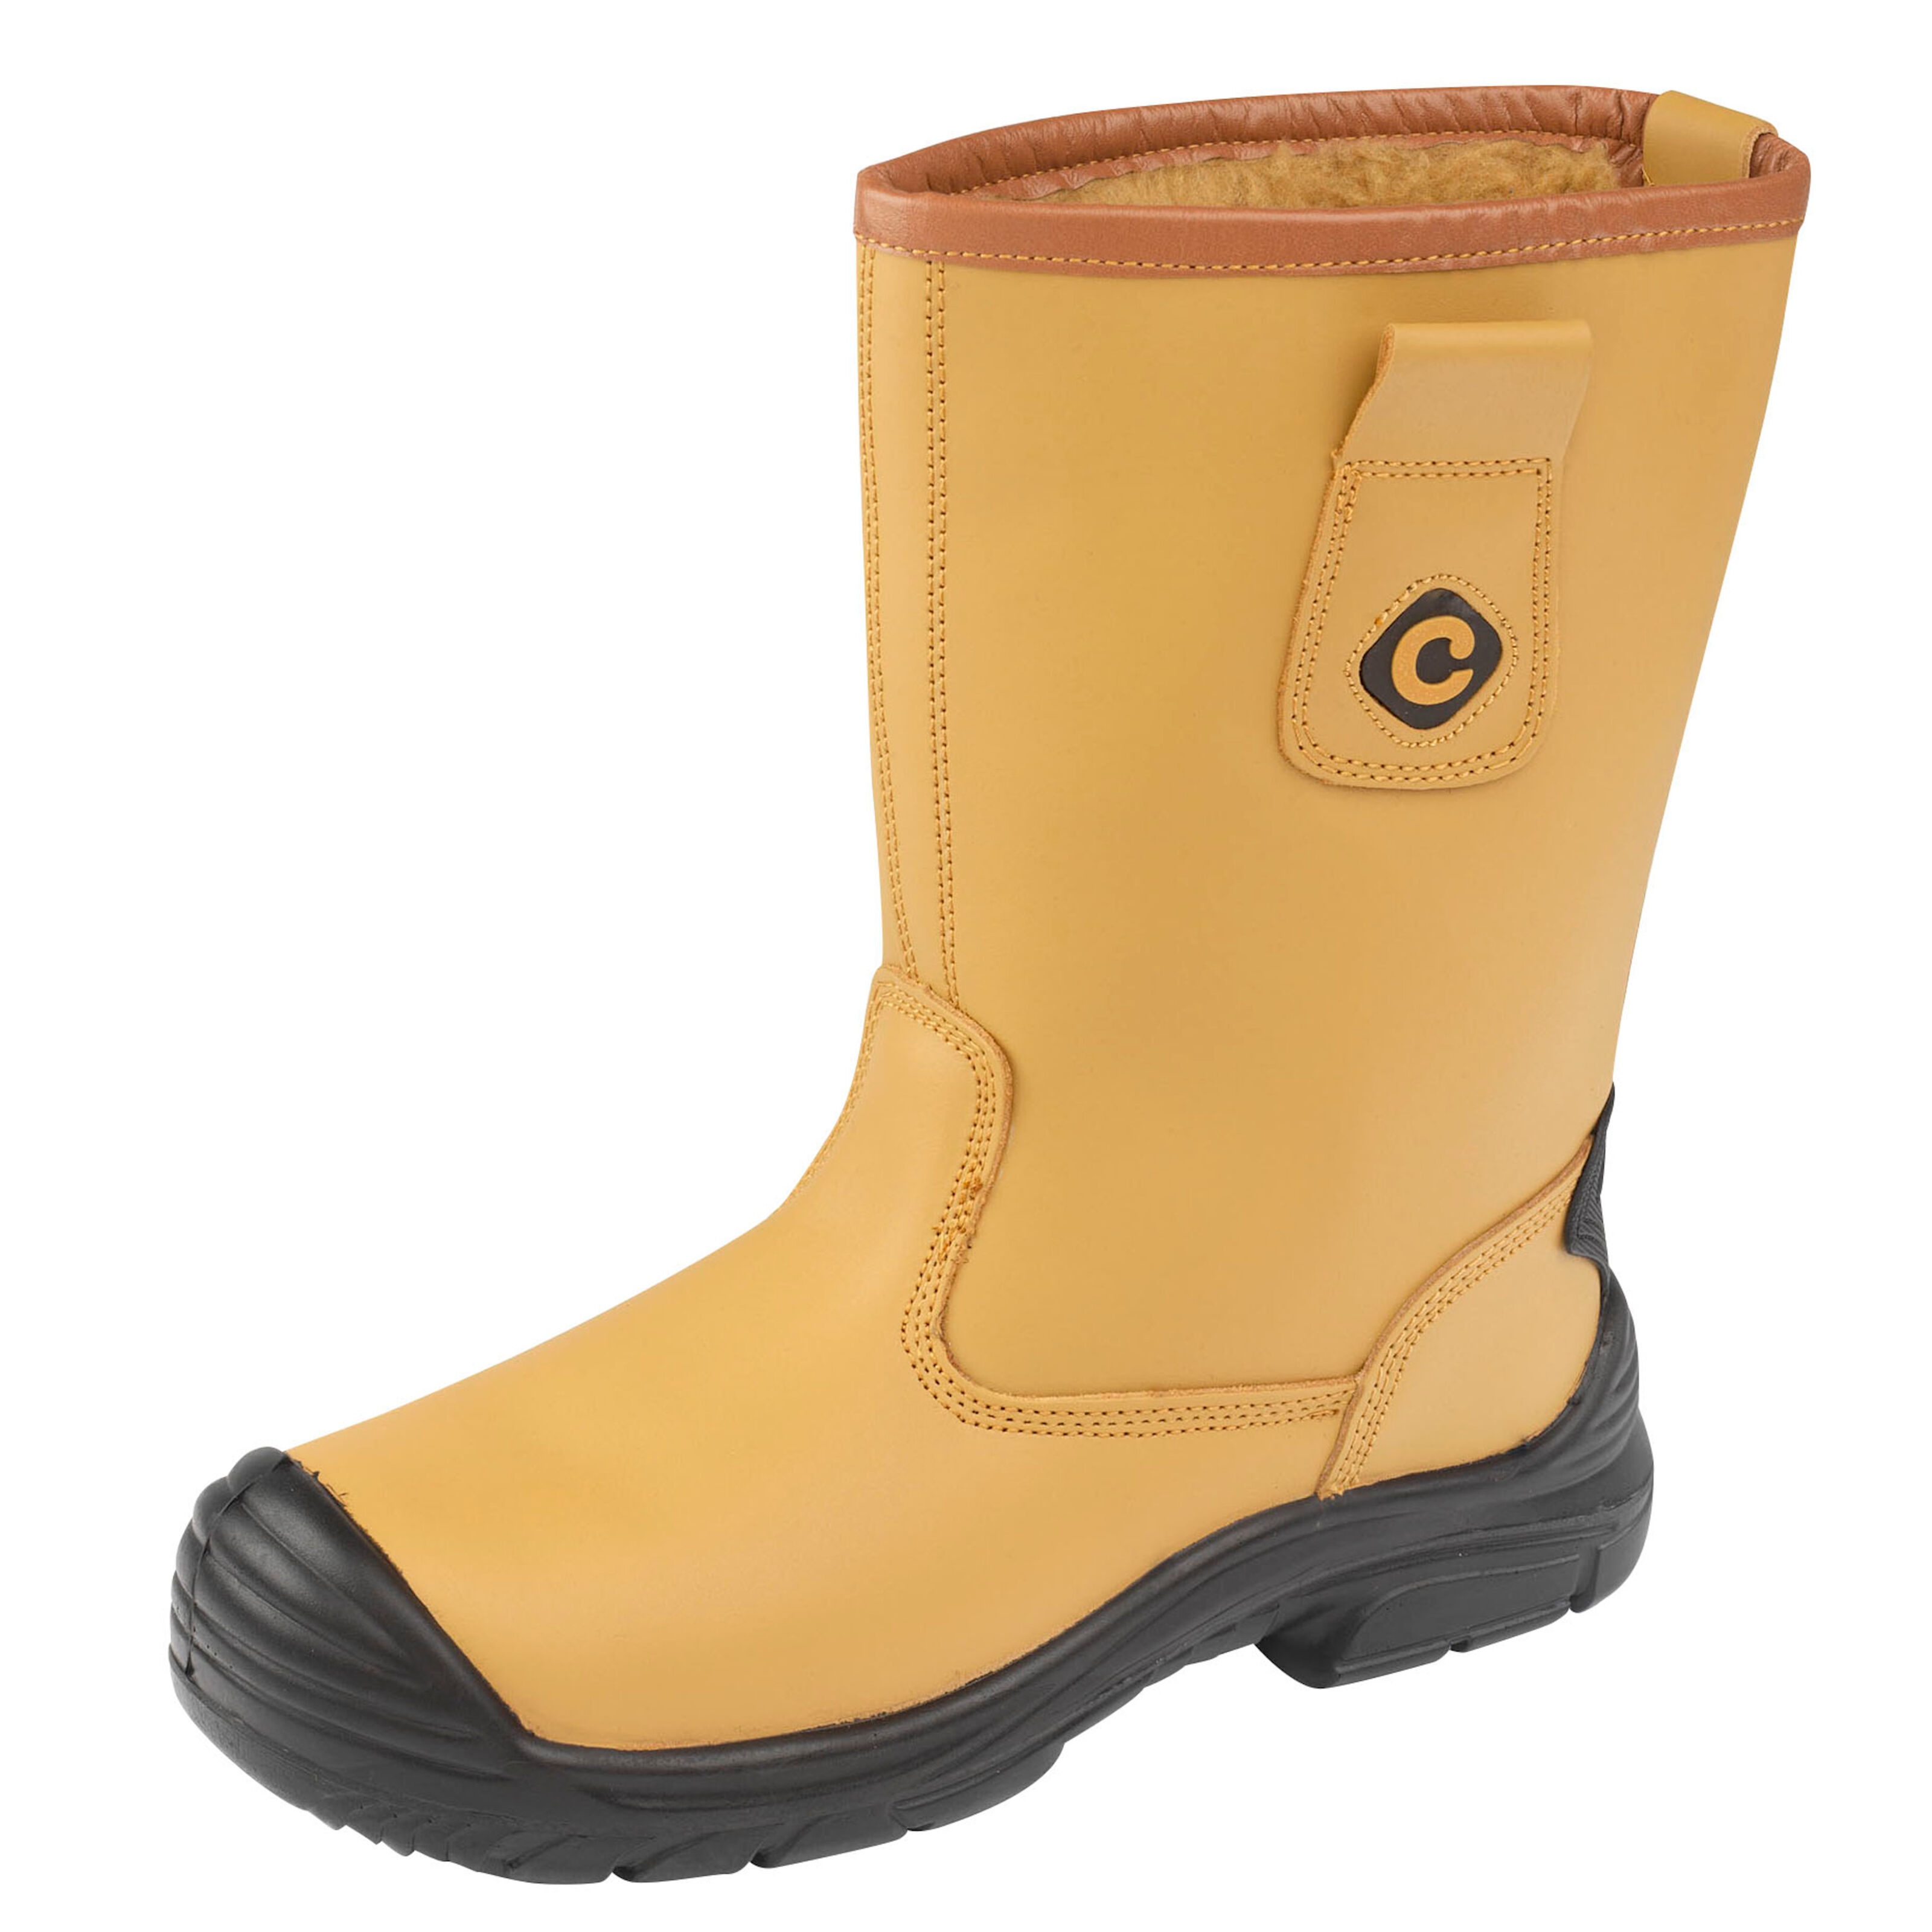 Contractor Safety Rigger Boots